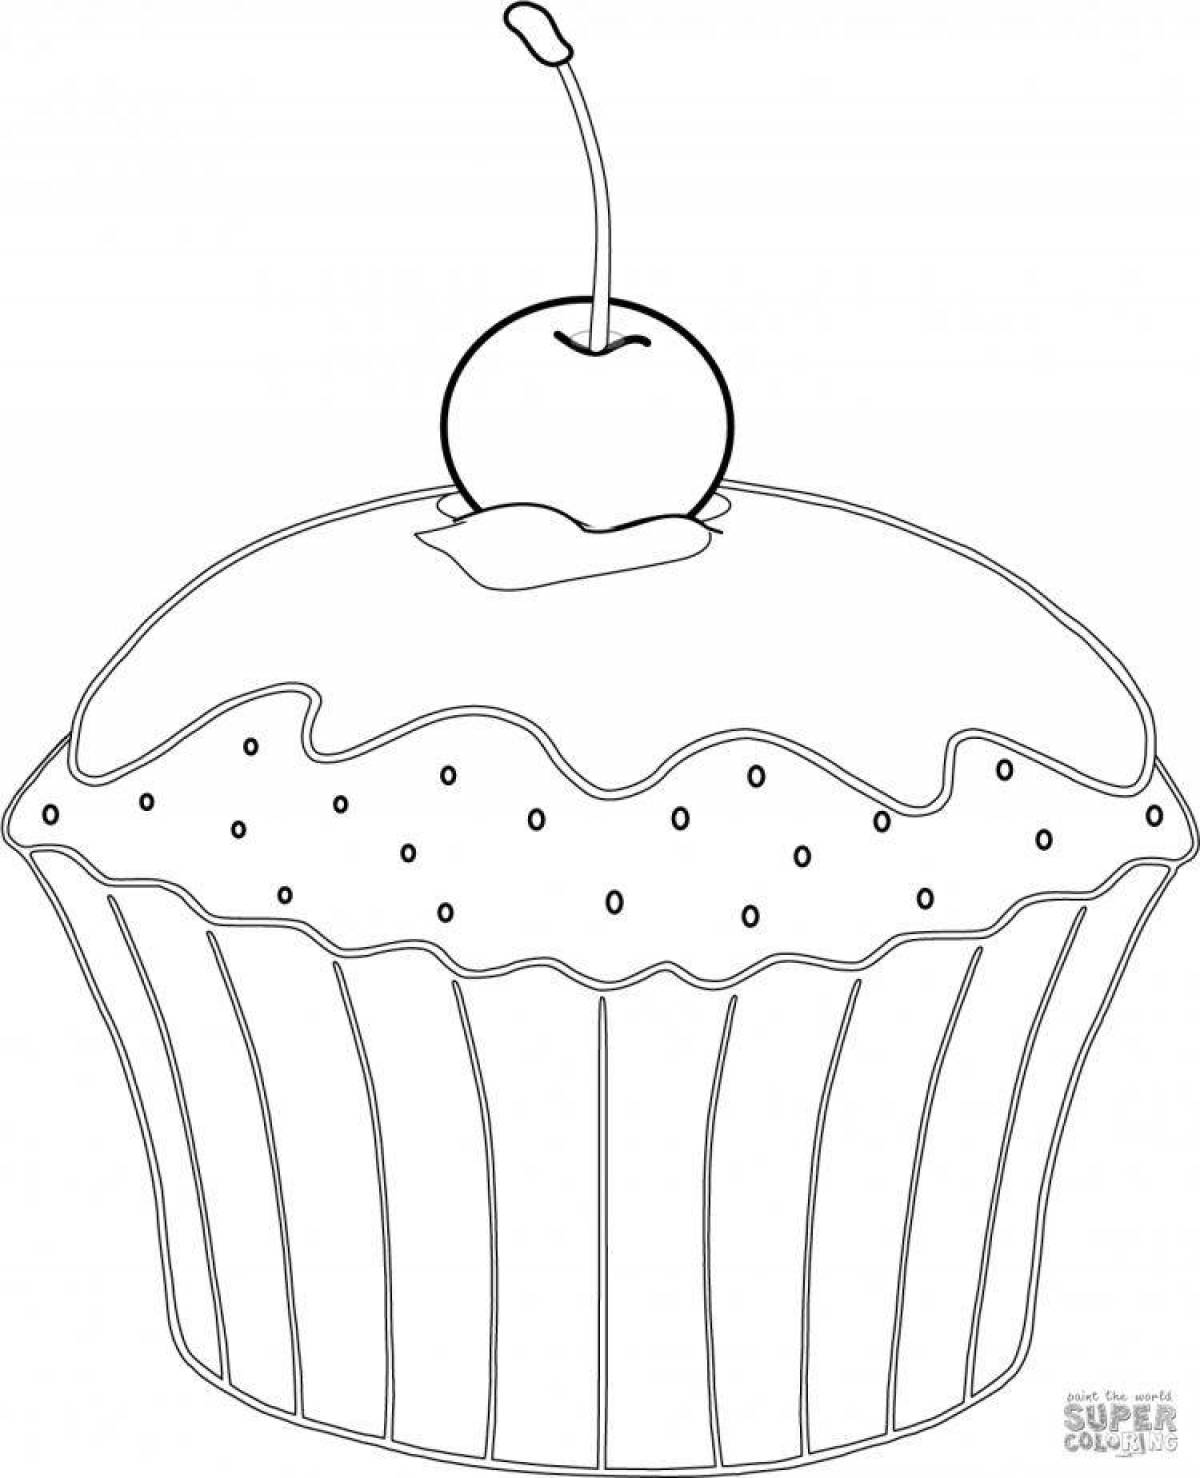 Colorful cupcakes coloring book for kids